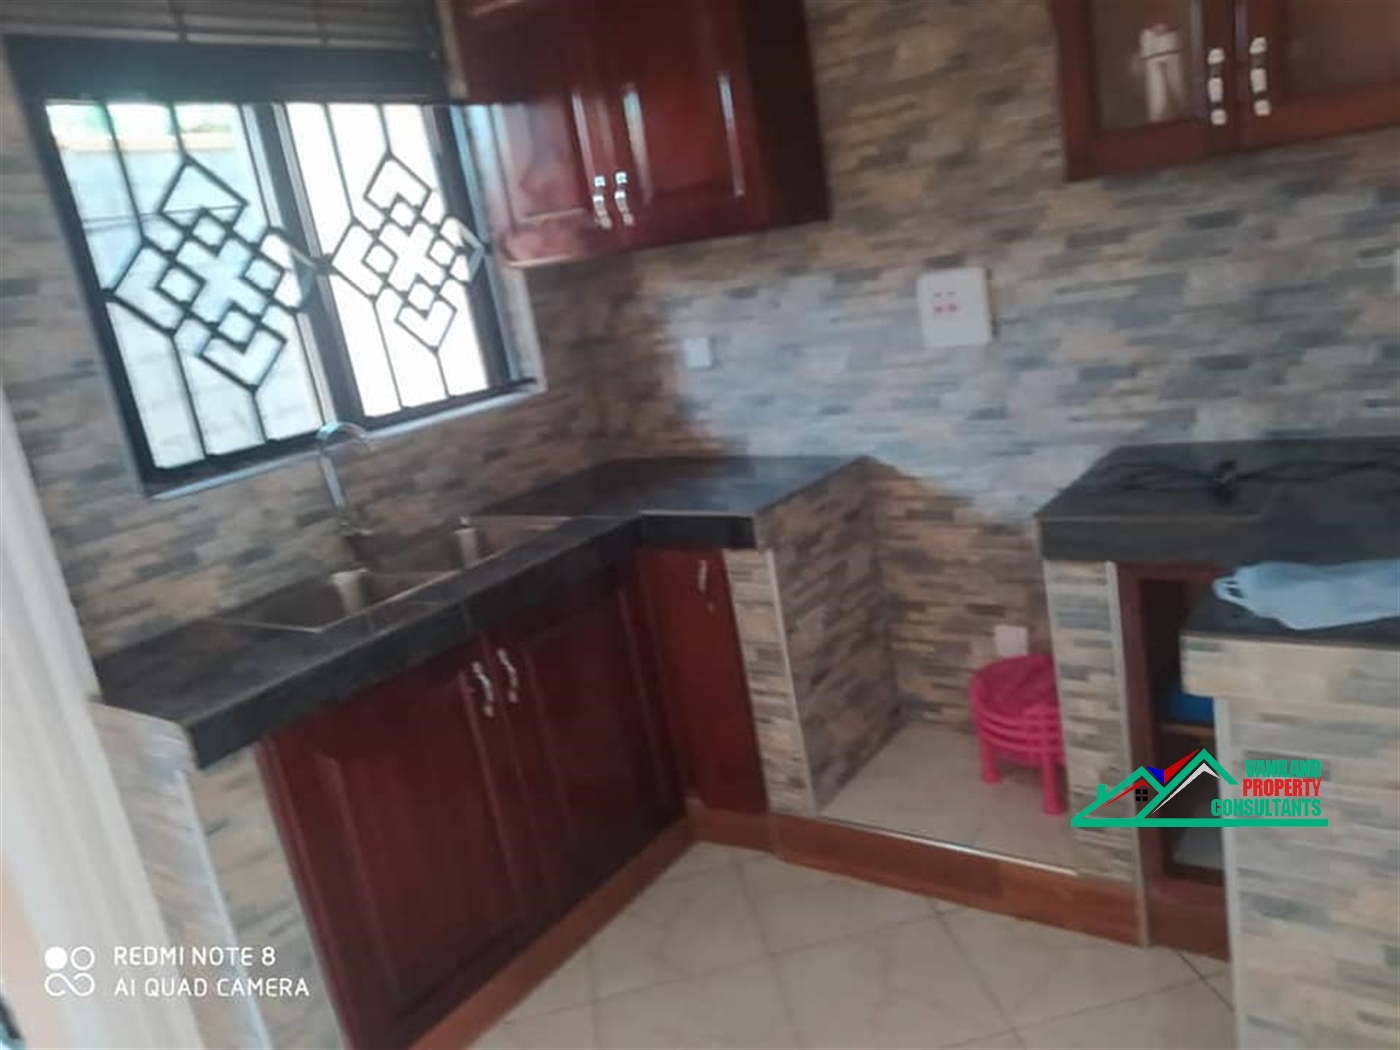 Bungalow for rent in Kitende Kampala